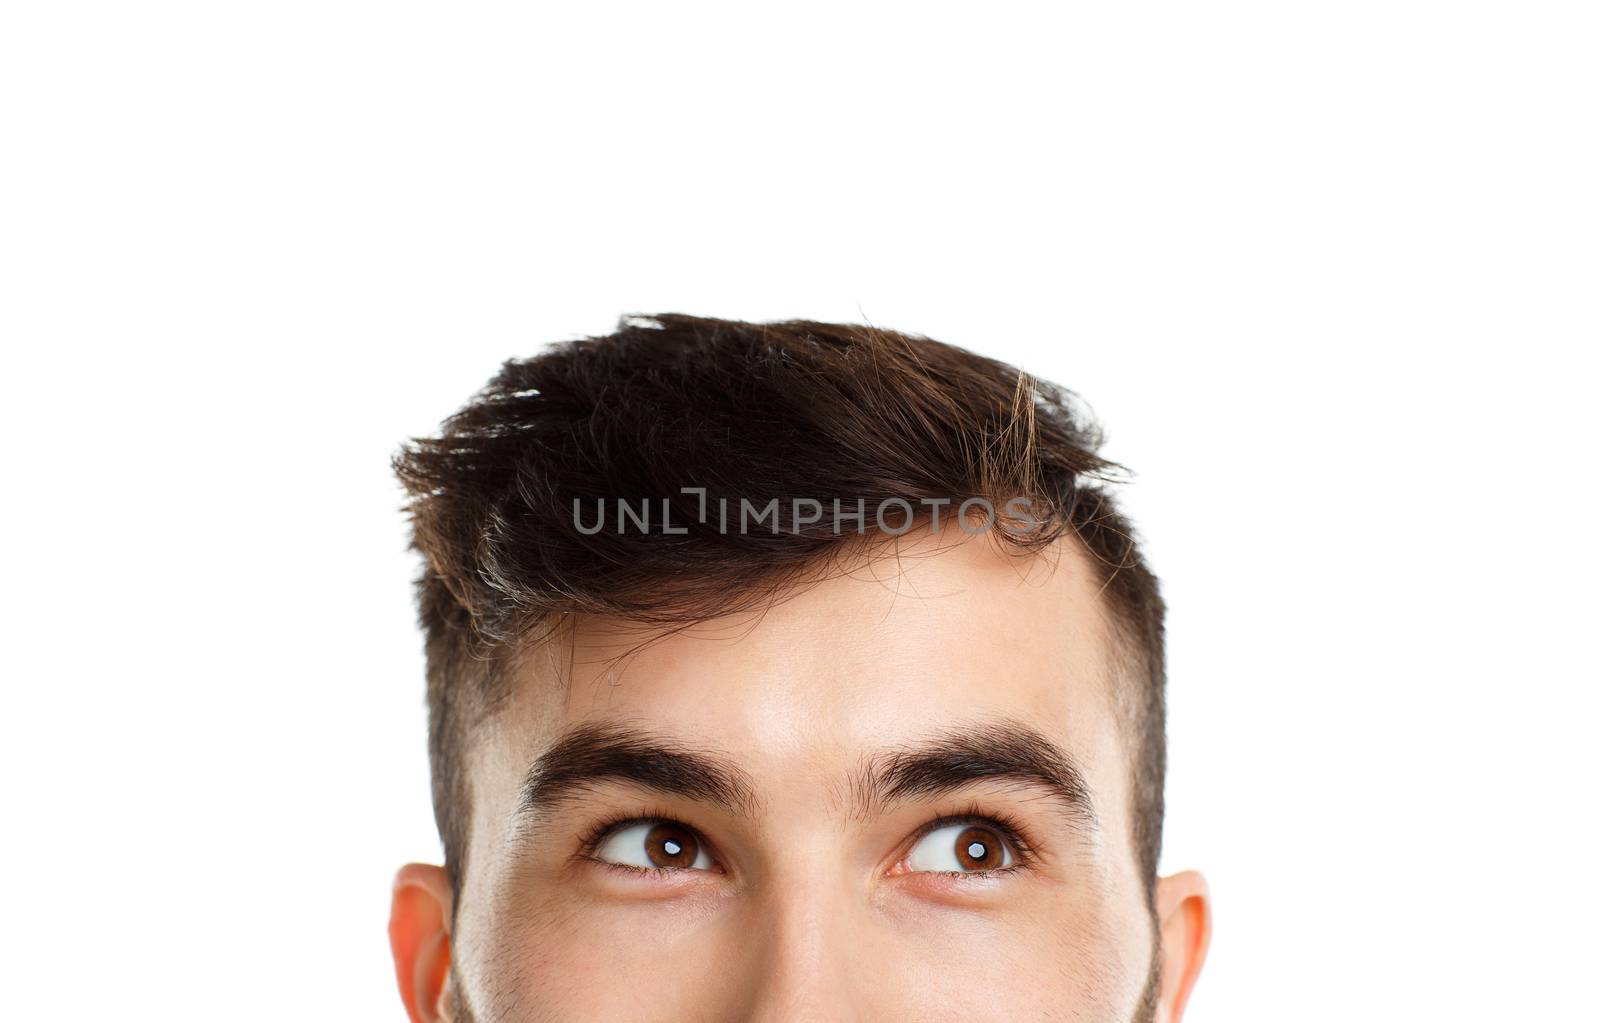 Half face expression looking on white background